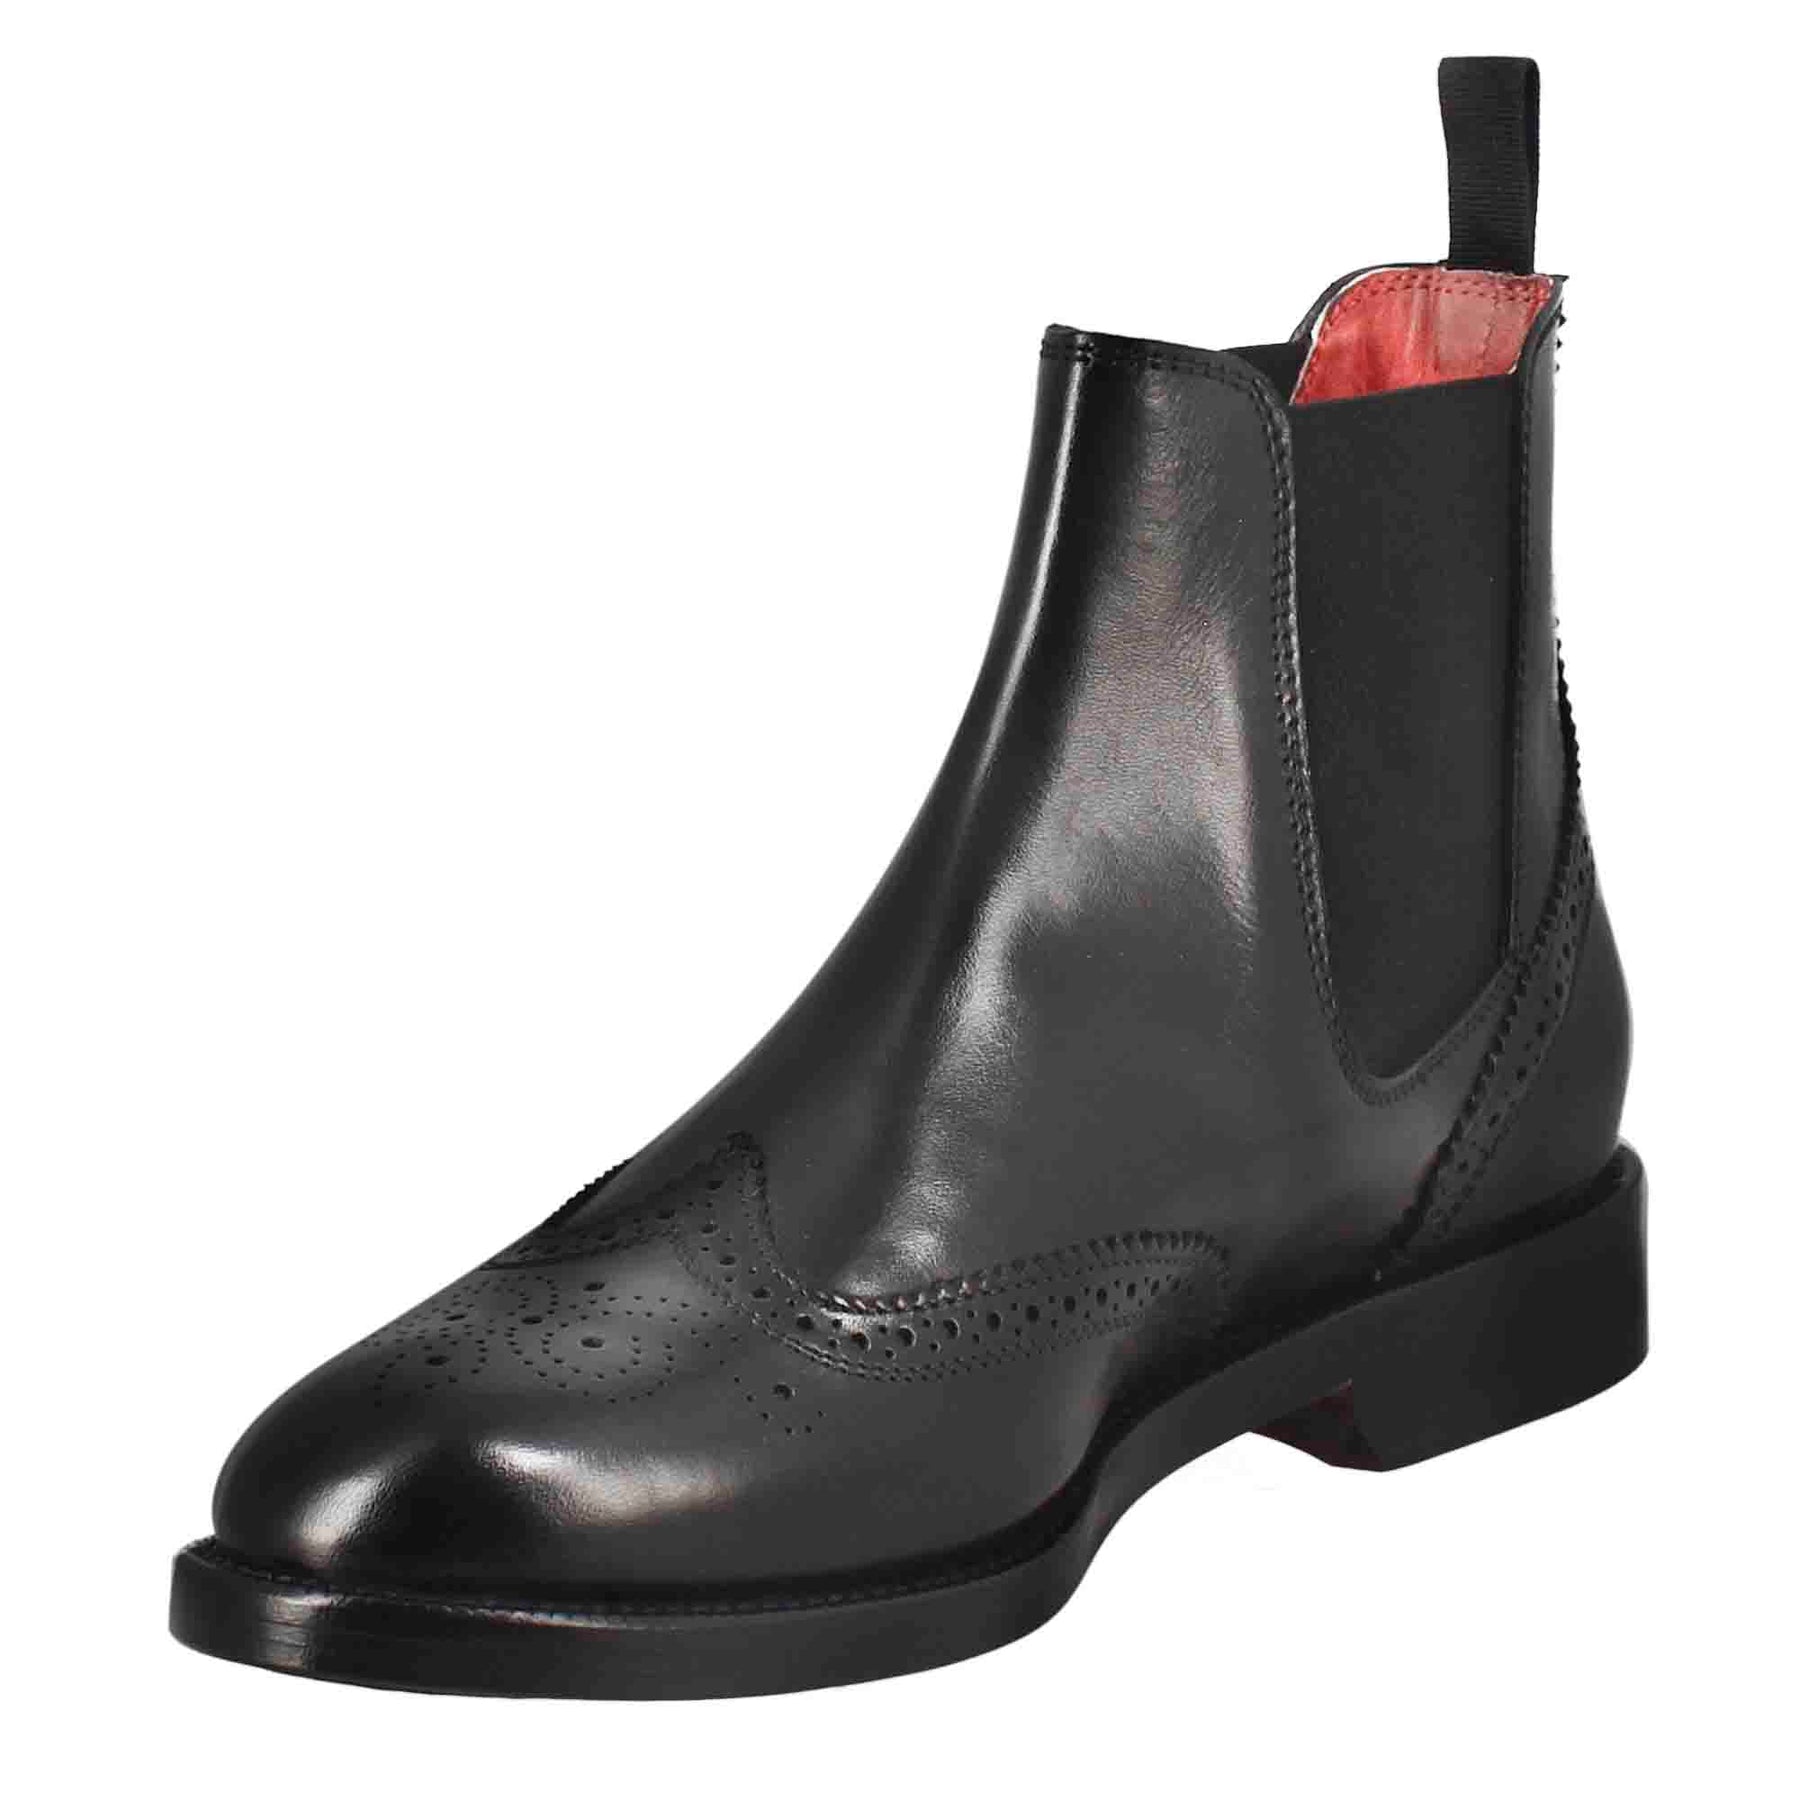 Women's Chelsea boot with brogue details in black leather